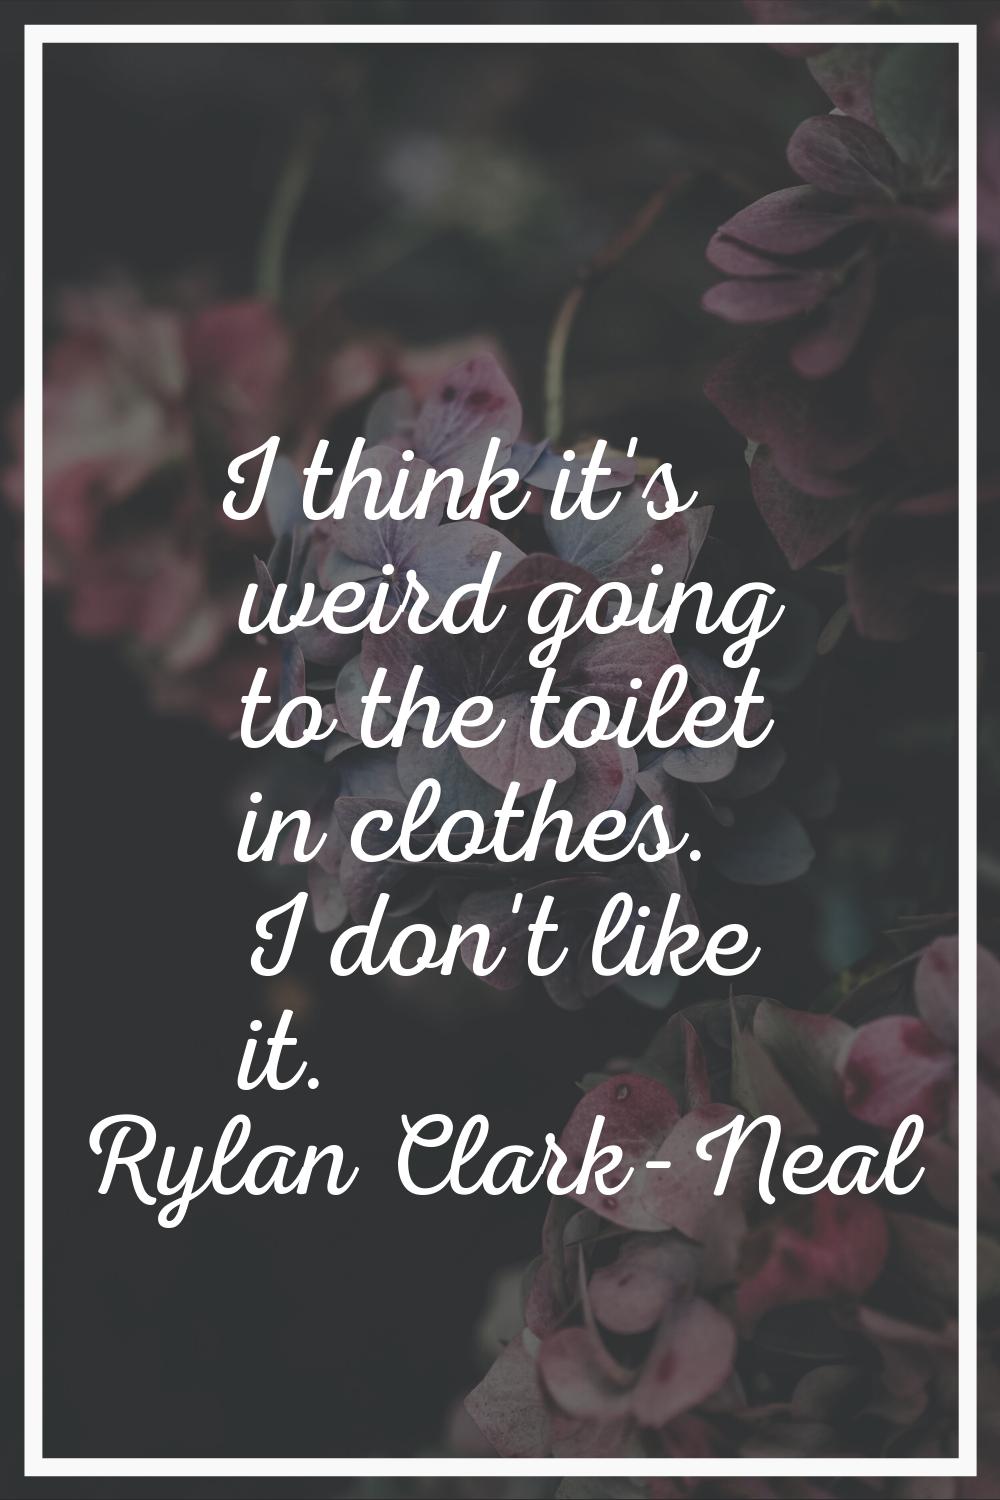 I think it's weird going to the toilet in clothes. I don't like it.